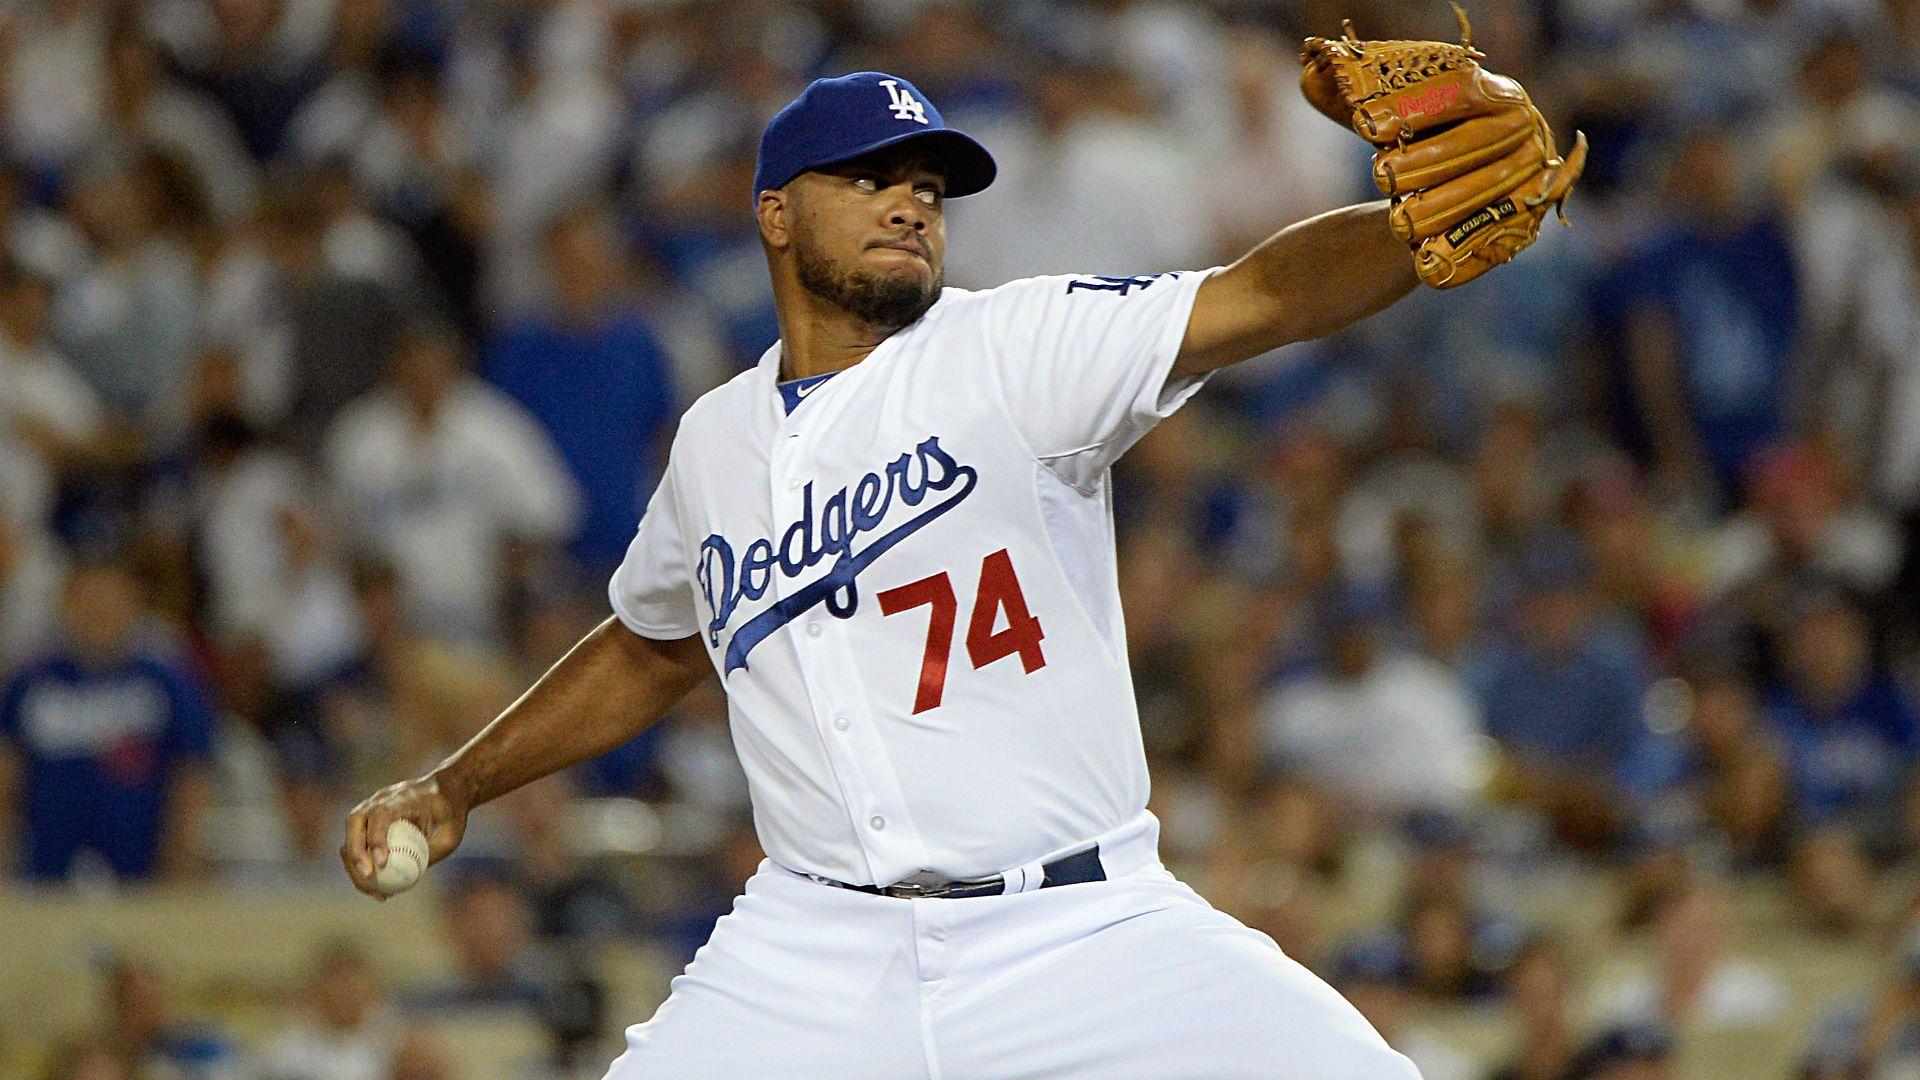 That Kenley Jansen $80M megadeal? He can opt out after 2019 to